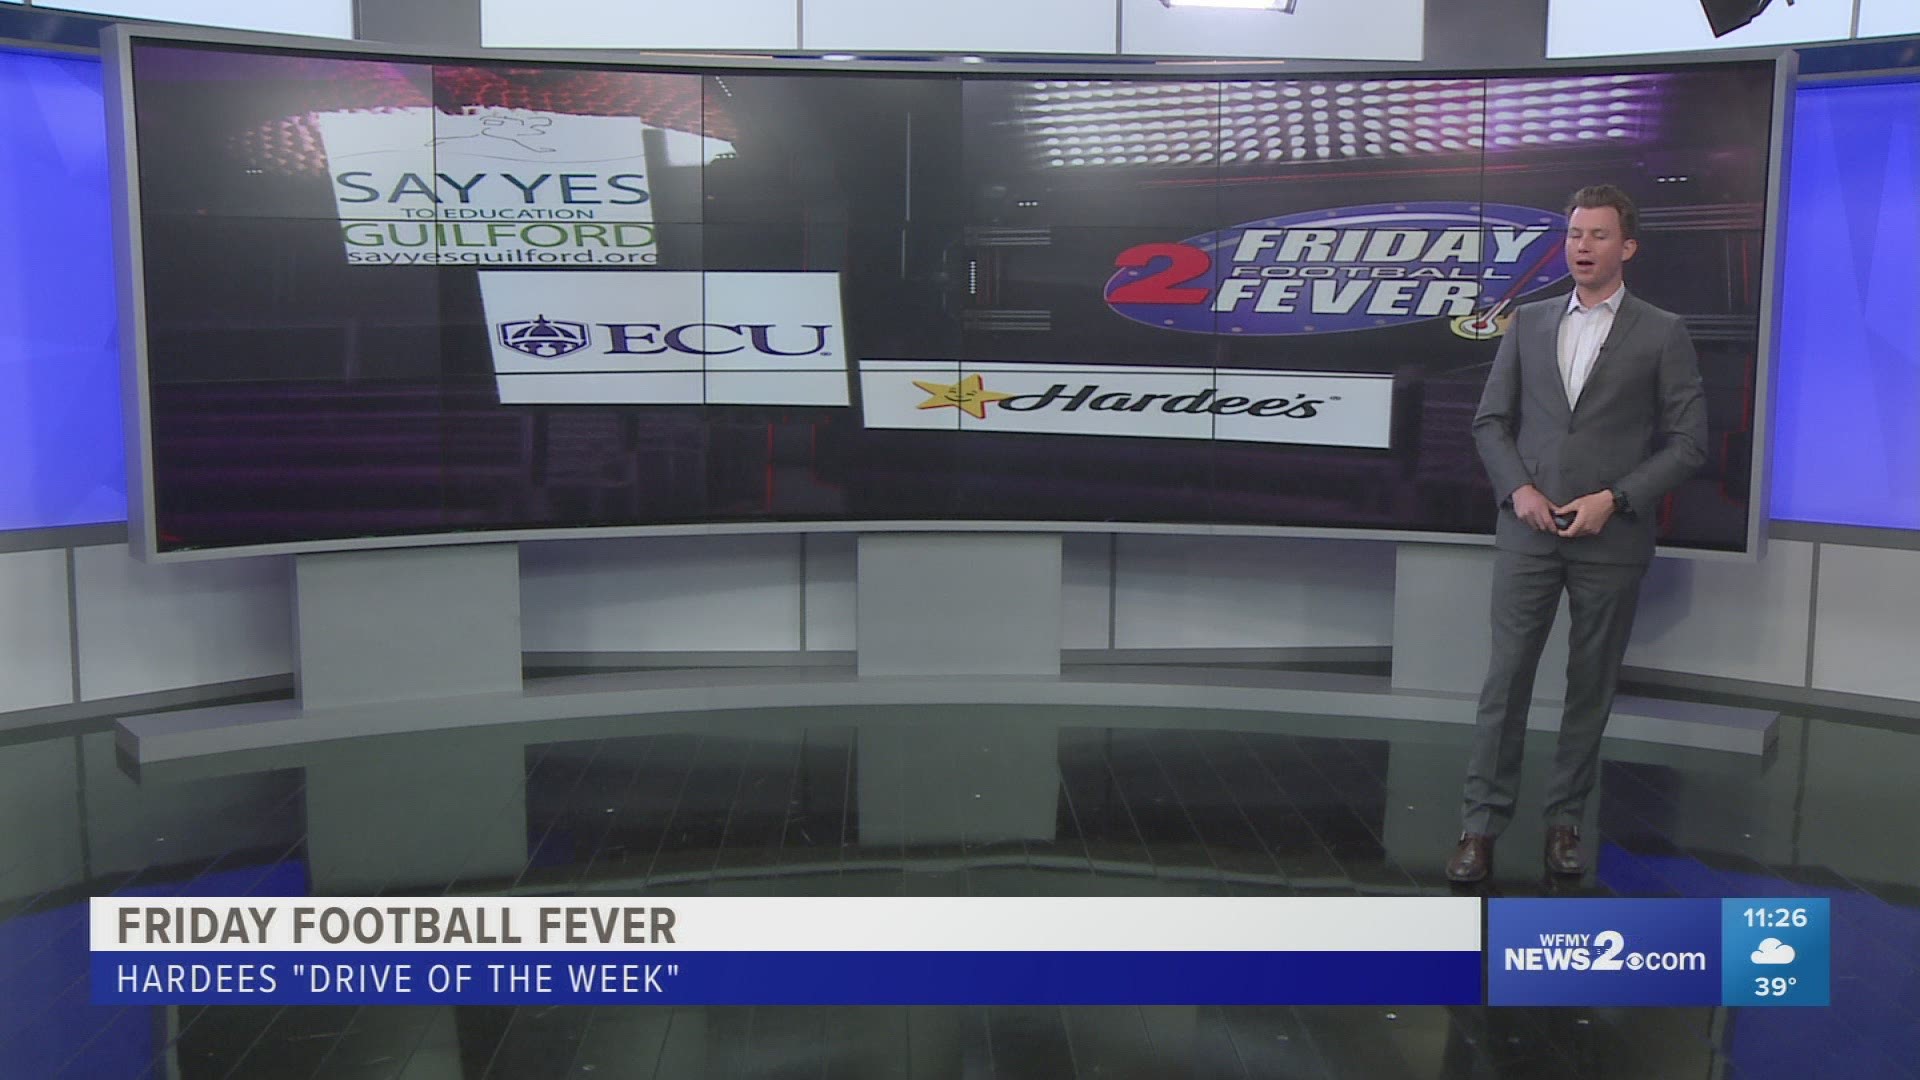 A trio of plays by Smith High School makes up our Hardees "Drive of the Week"